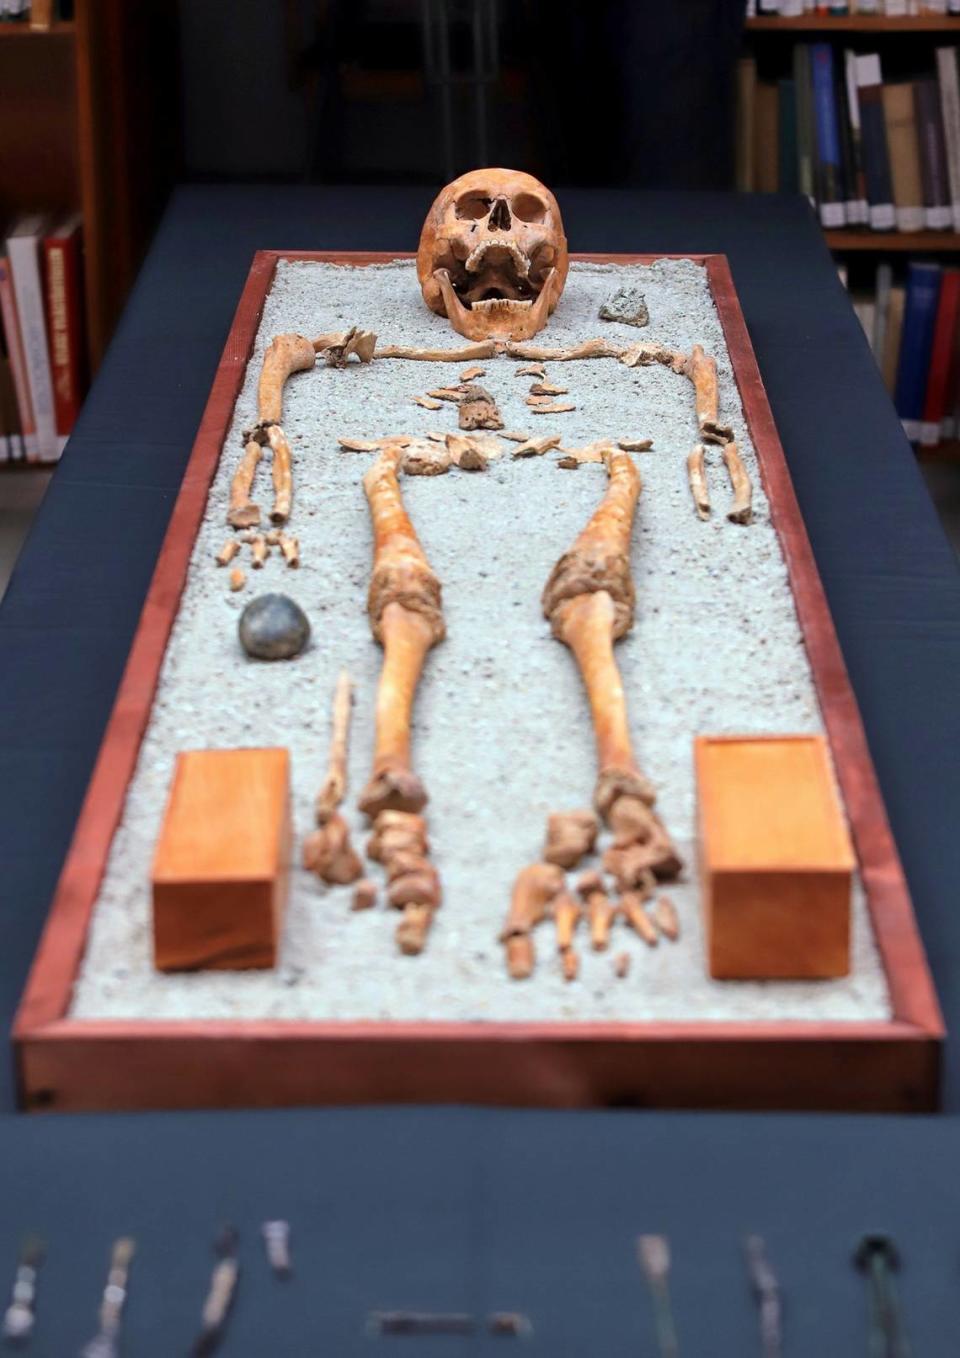 The physician’s skeletal remains on display